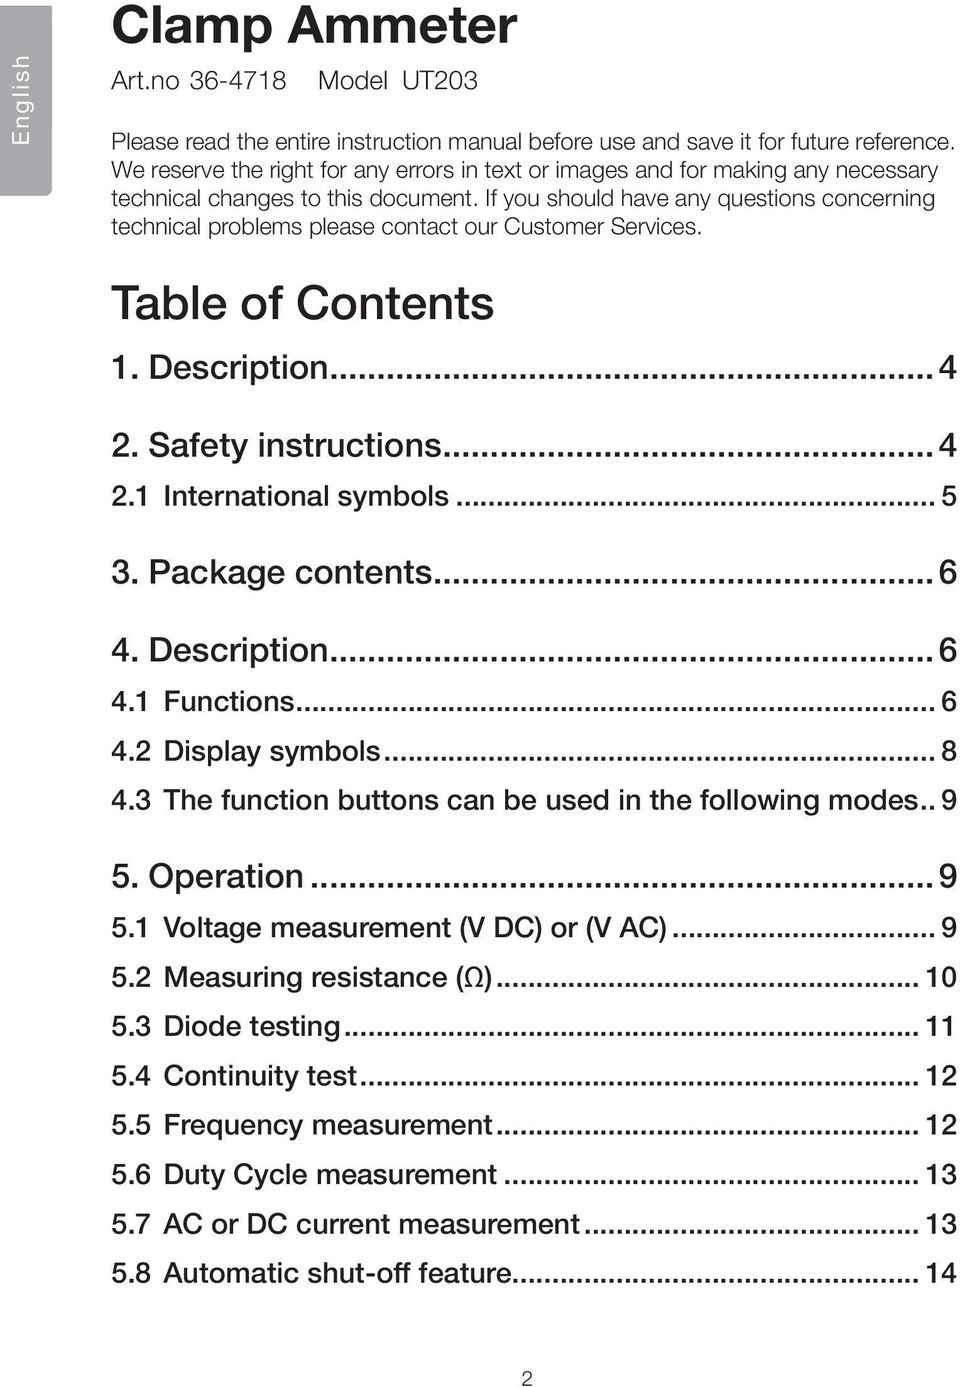 If you should have any questions concerning technical problems please contact our Customer Services. Table of Contents 1. Description...4 2. Safety instructions...4 2.1 International symbols... 5 3.